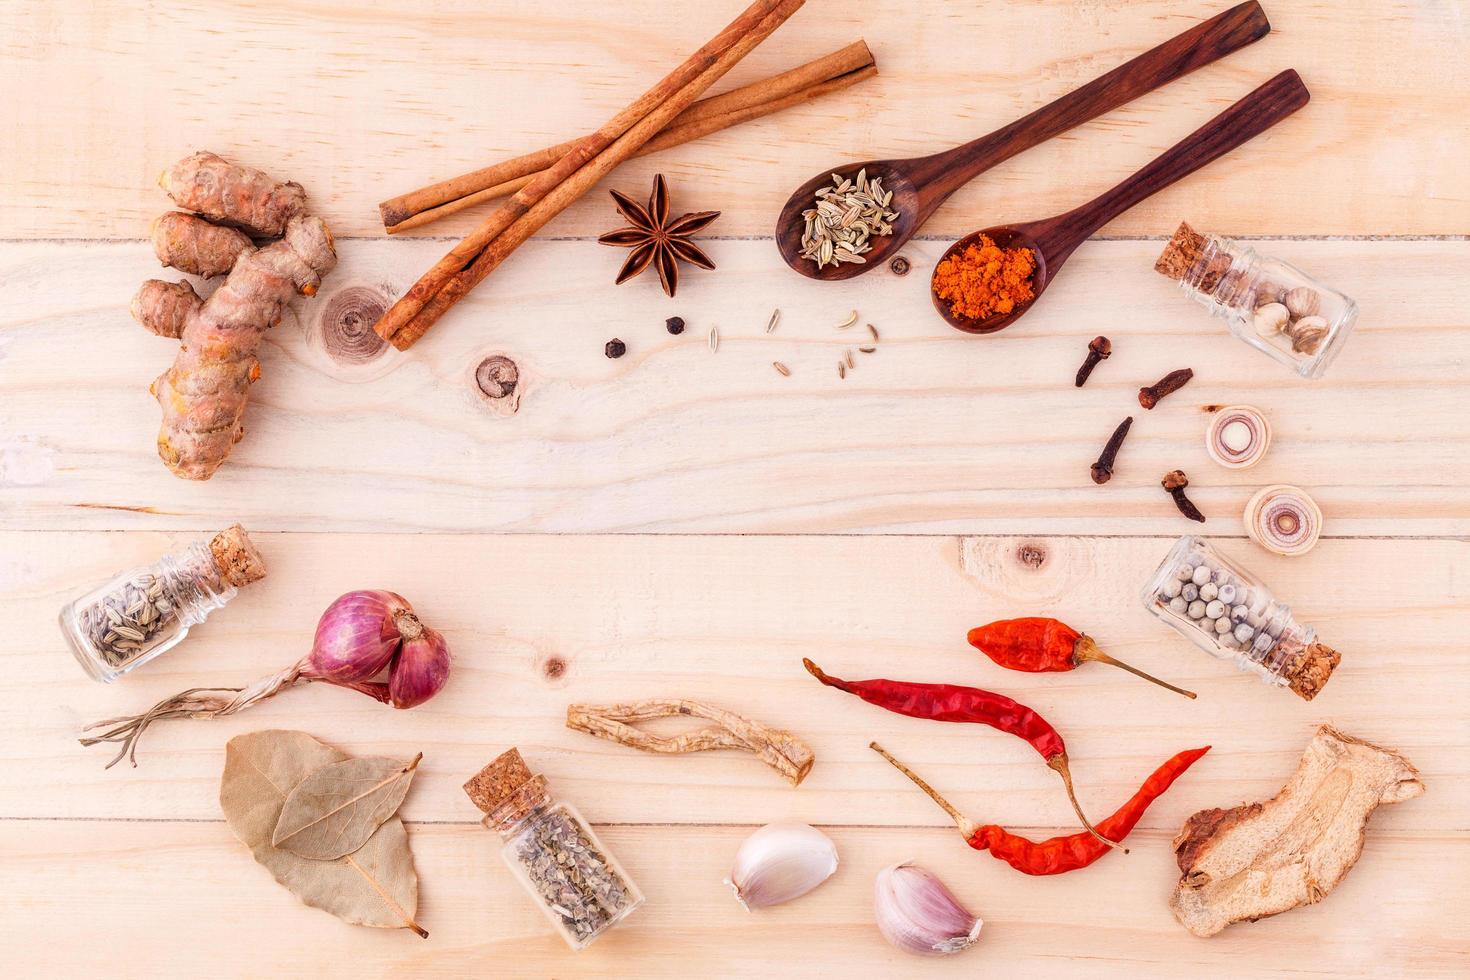 Top view of herbs and spices on wood photo